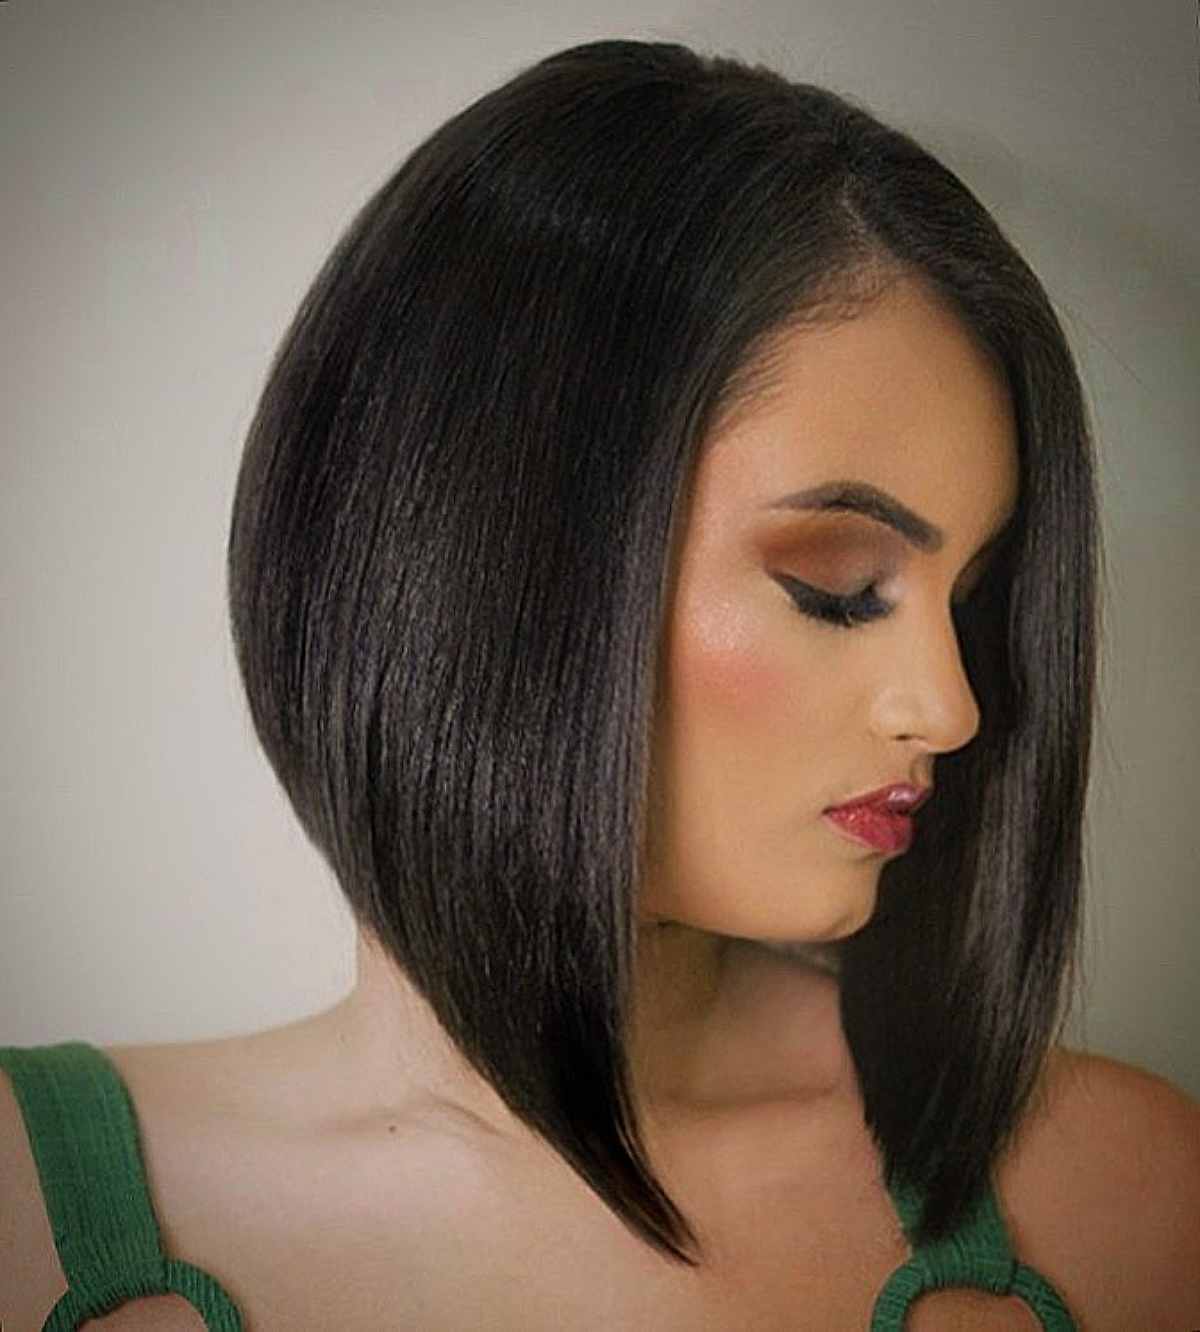 A-Line Bob with Side-Part